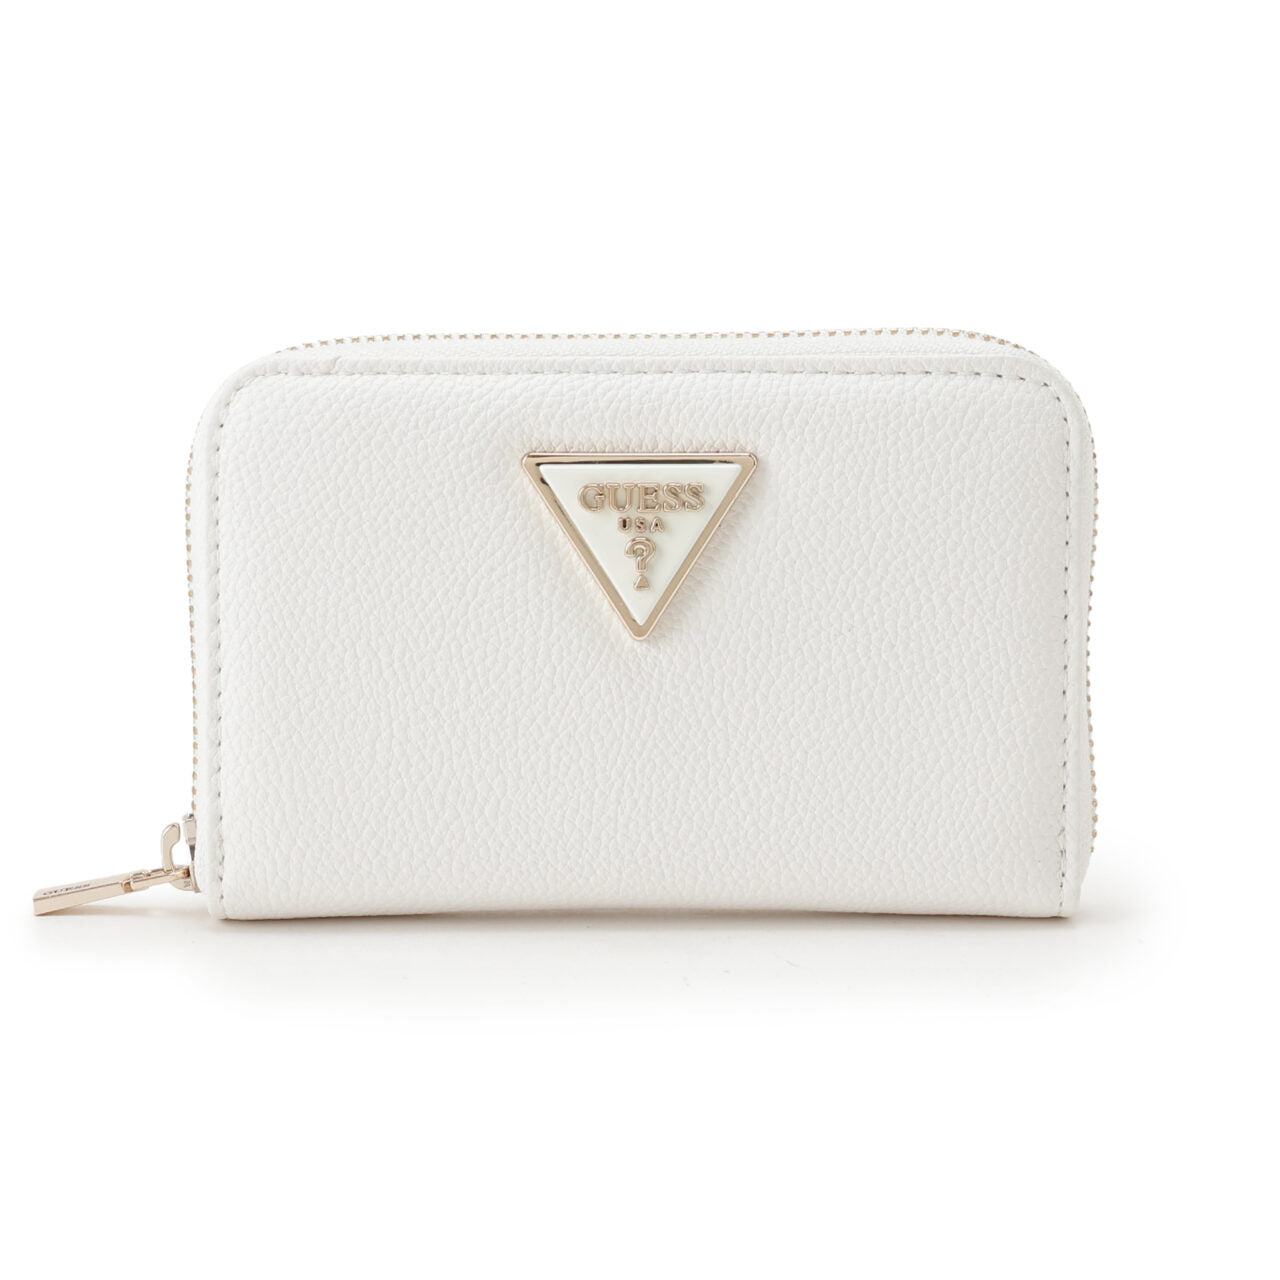 GUESS Meridian Triangle Logo Wallet Stone